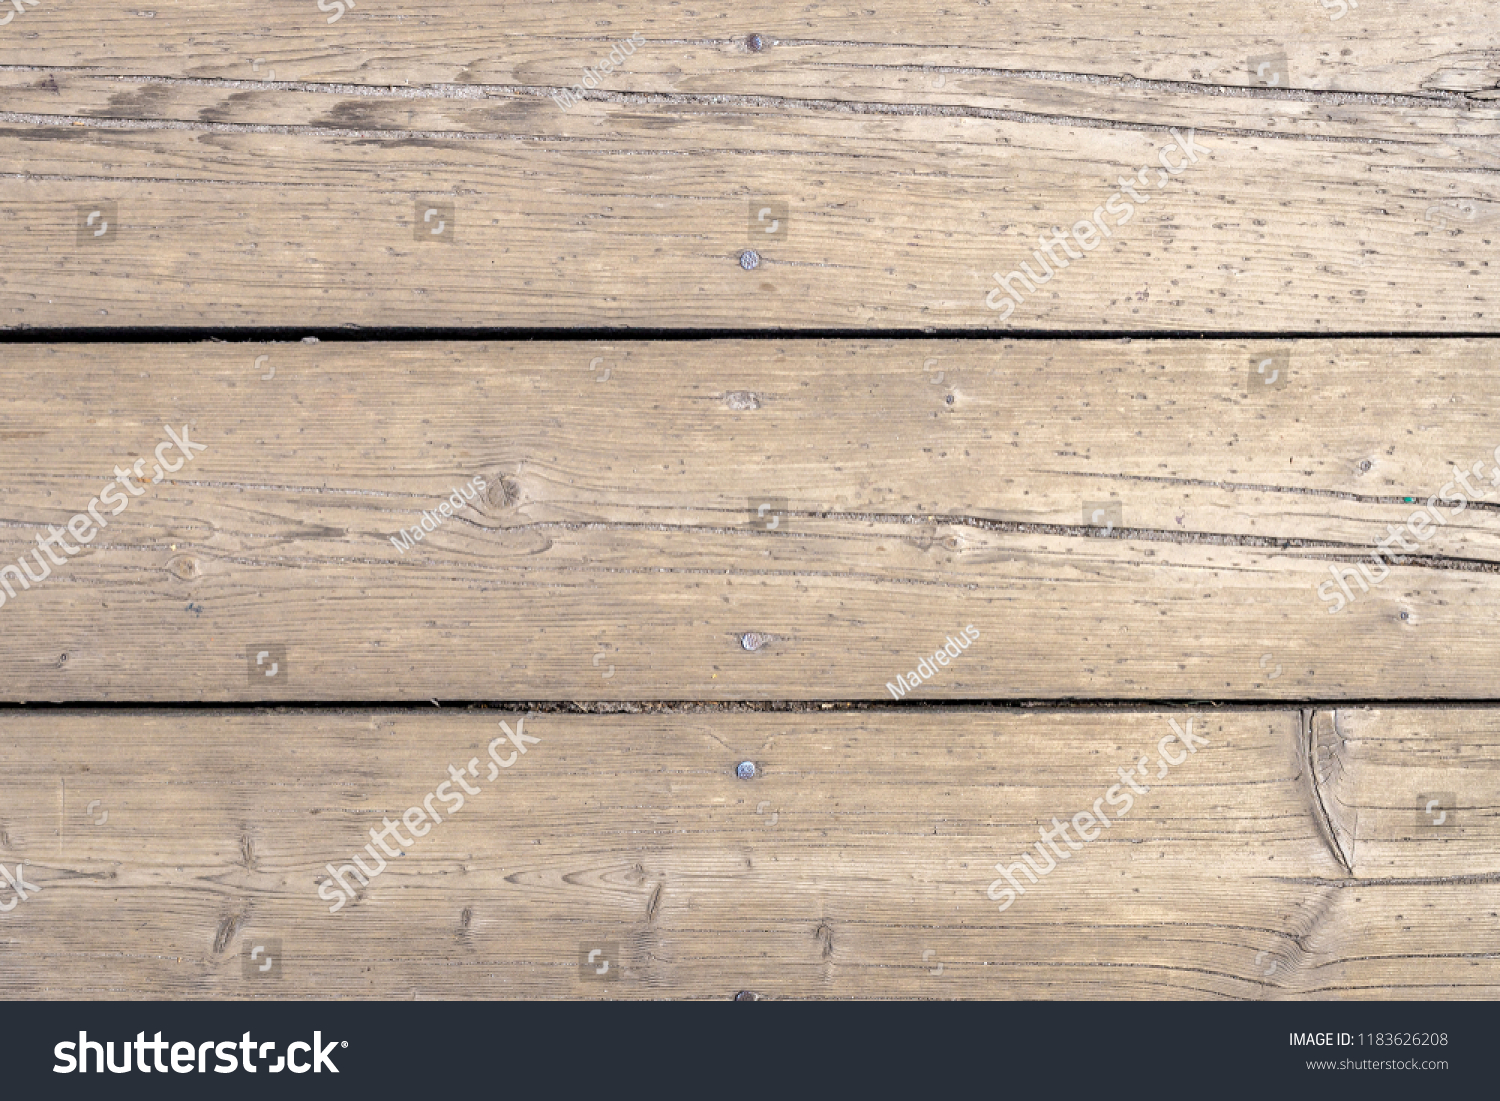 The old wood texture with natural patterns. #1183626208